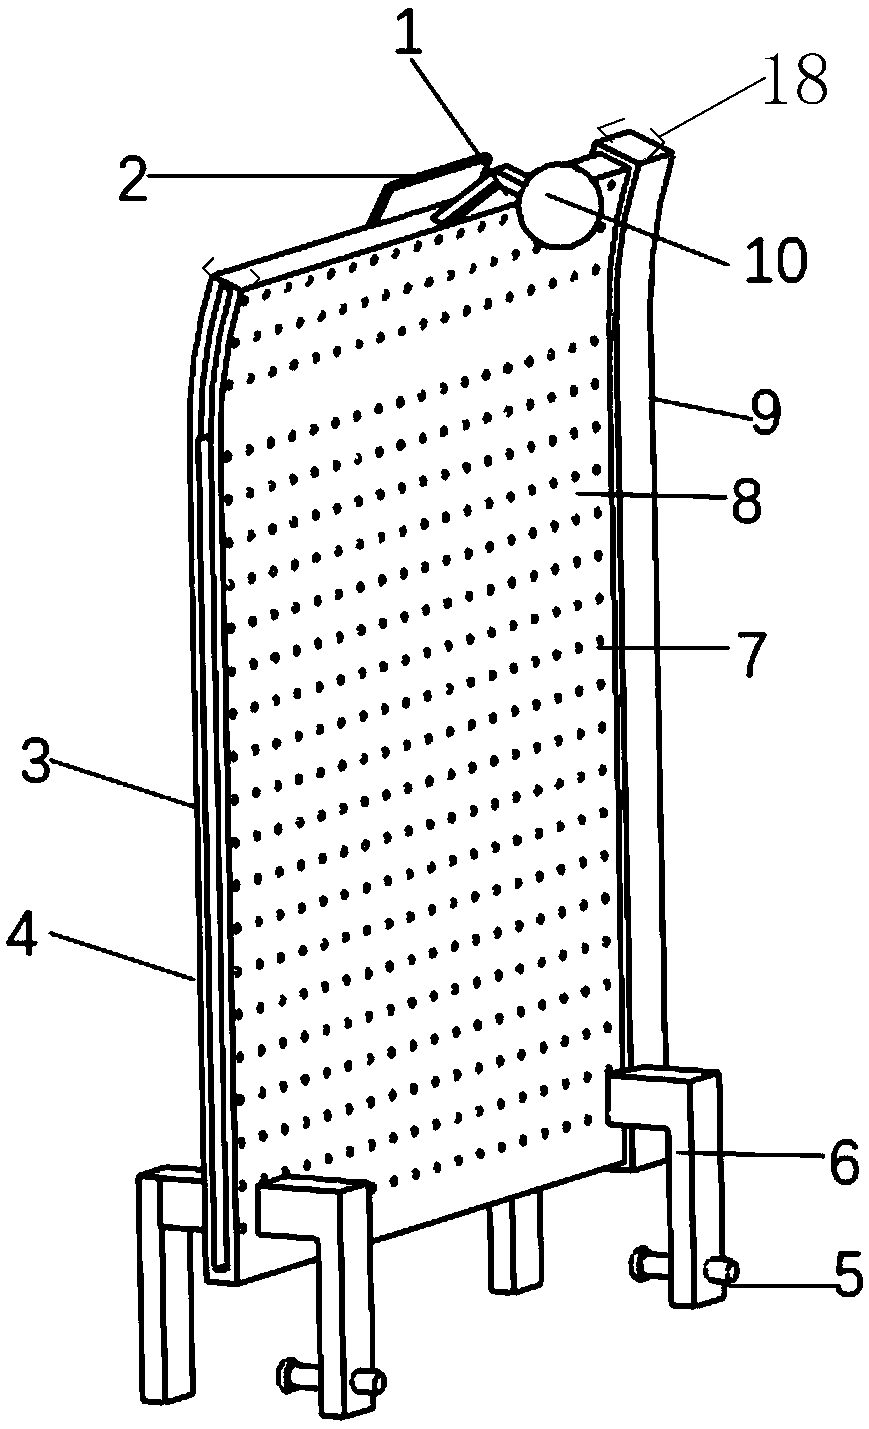 Novel multifunctional viaduct sound insulation device and method